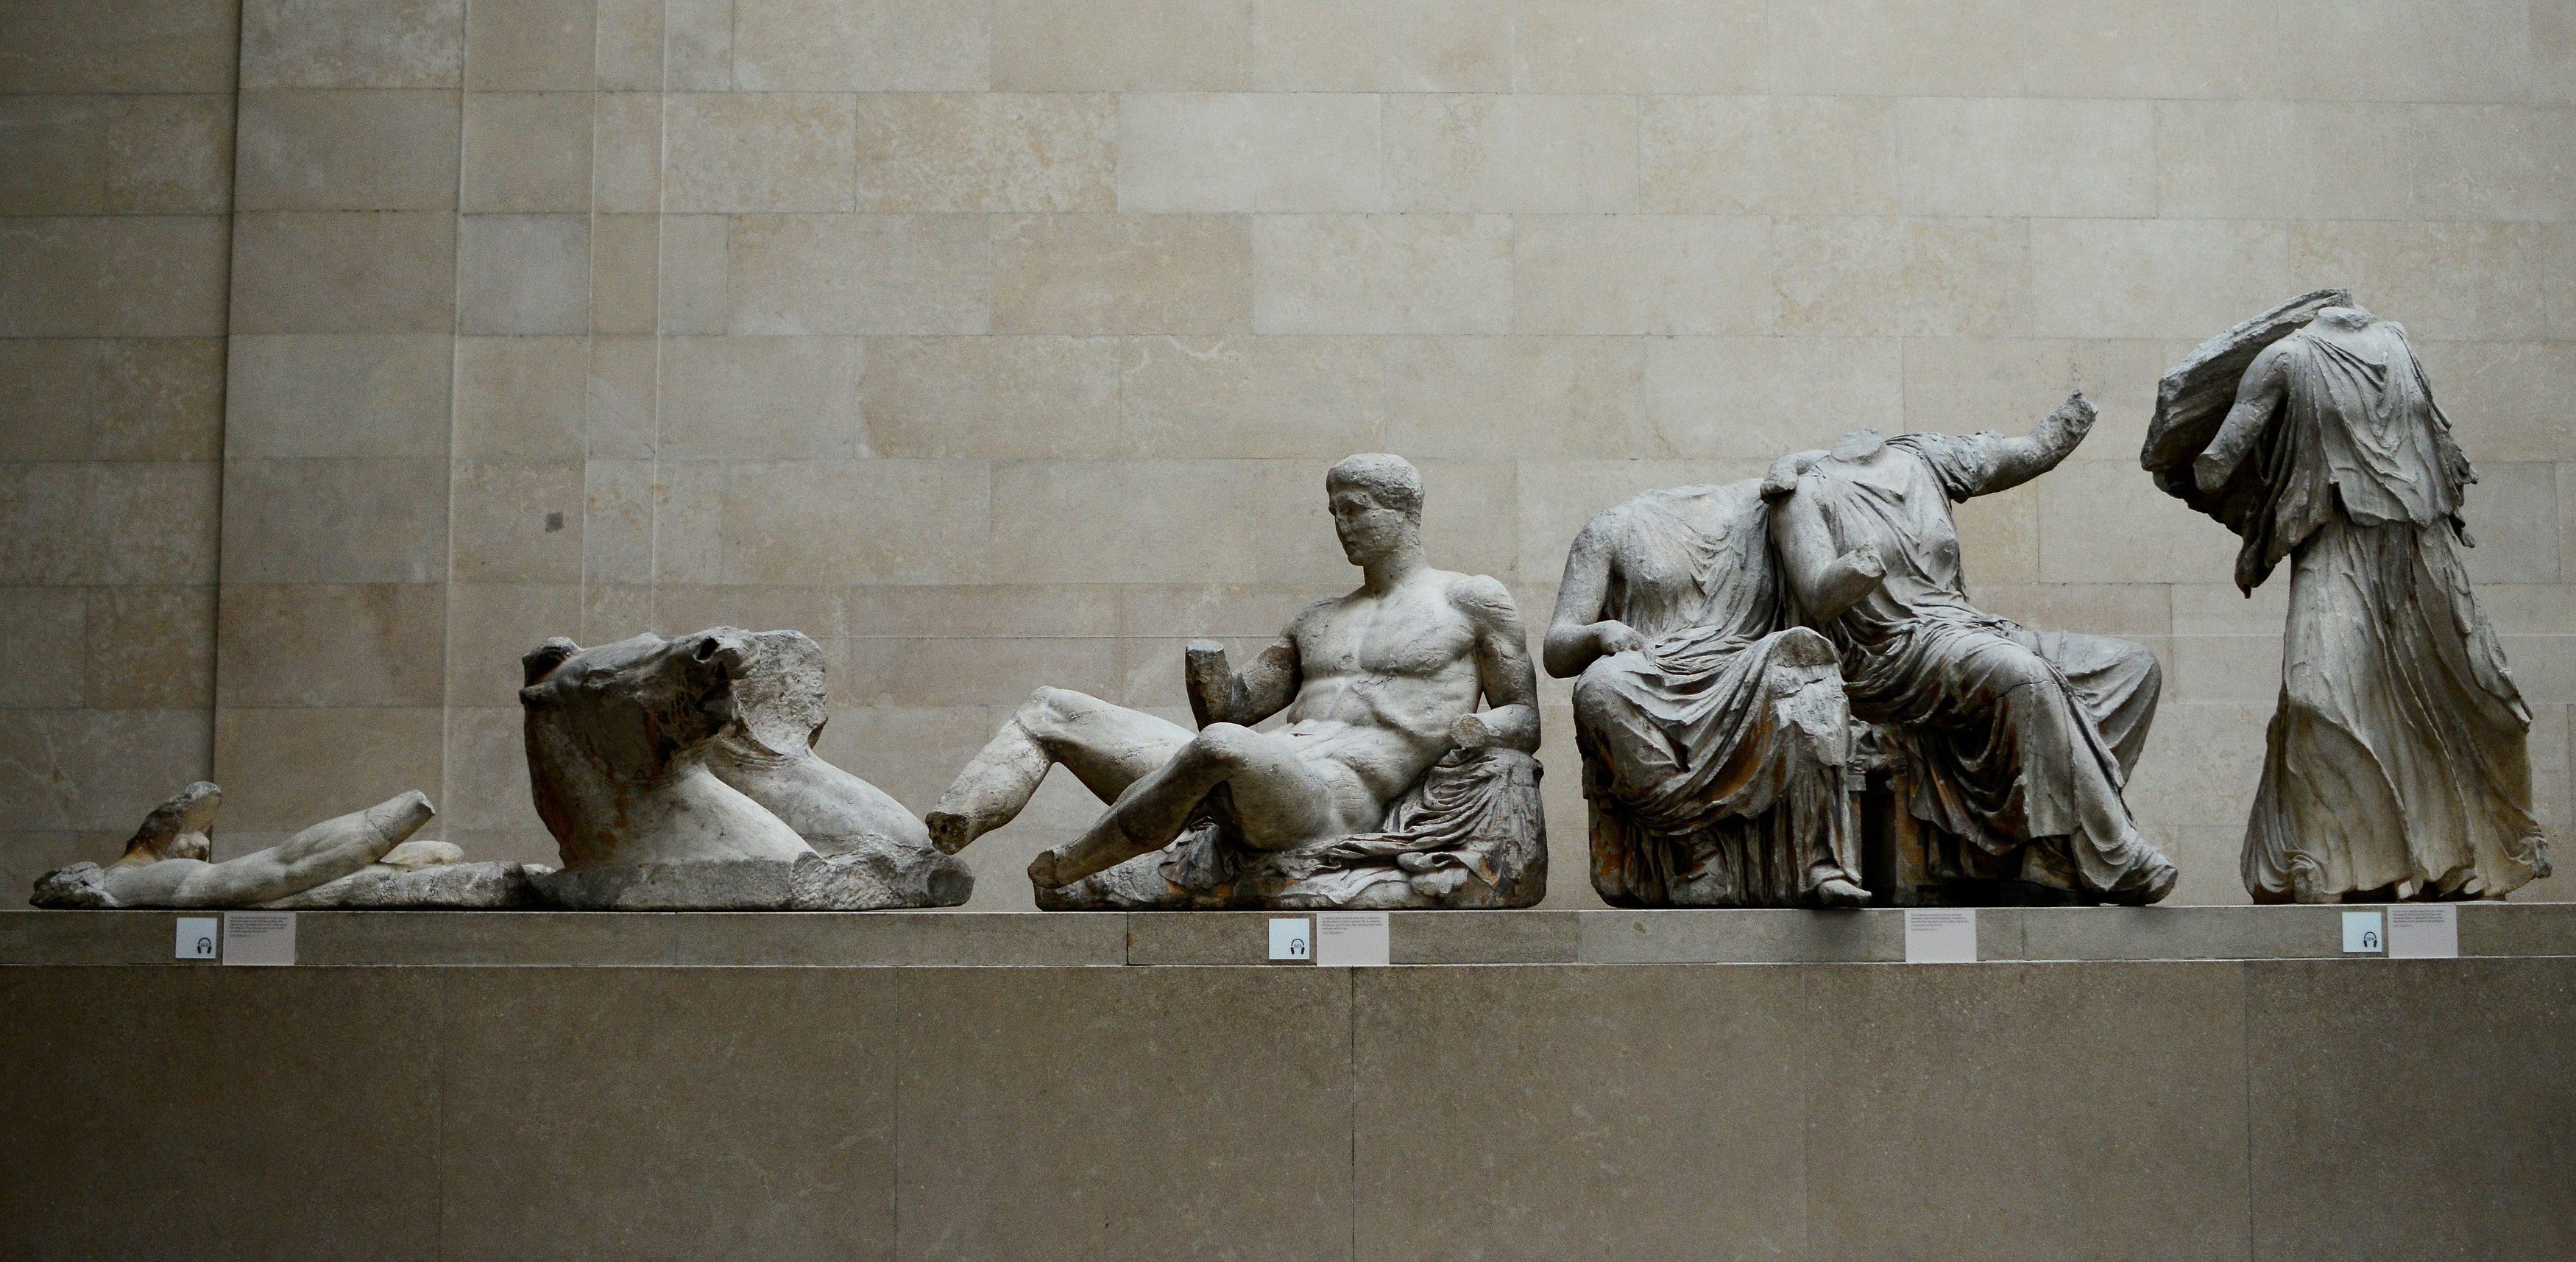 image Parthenon marbles are ours, Johnson tells Greece